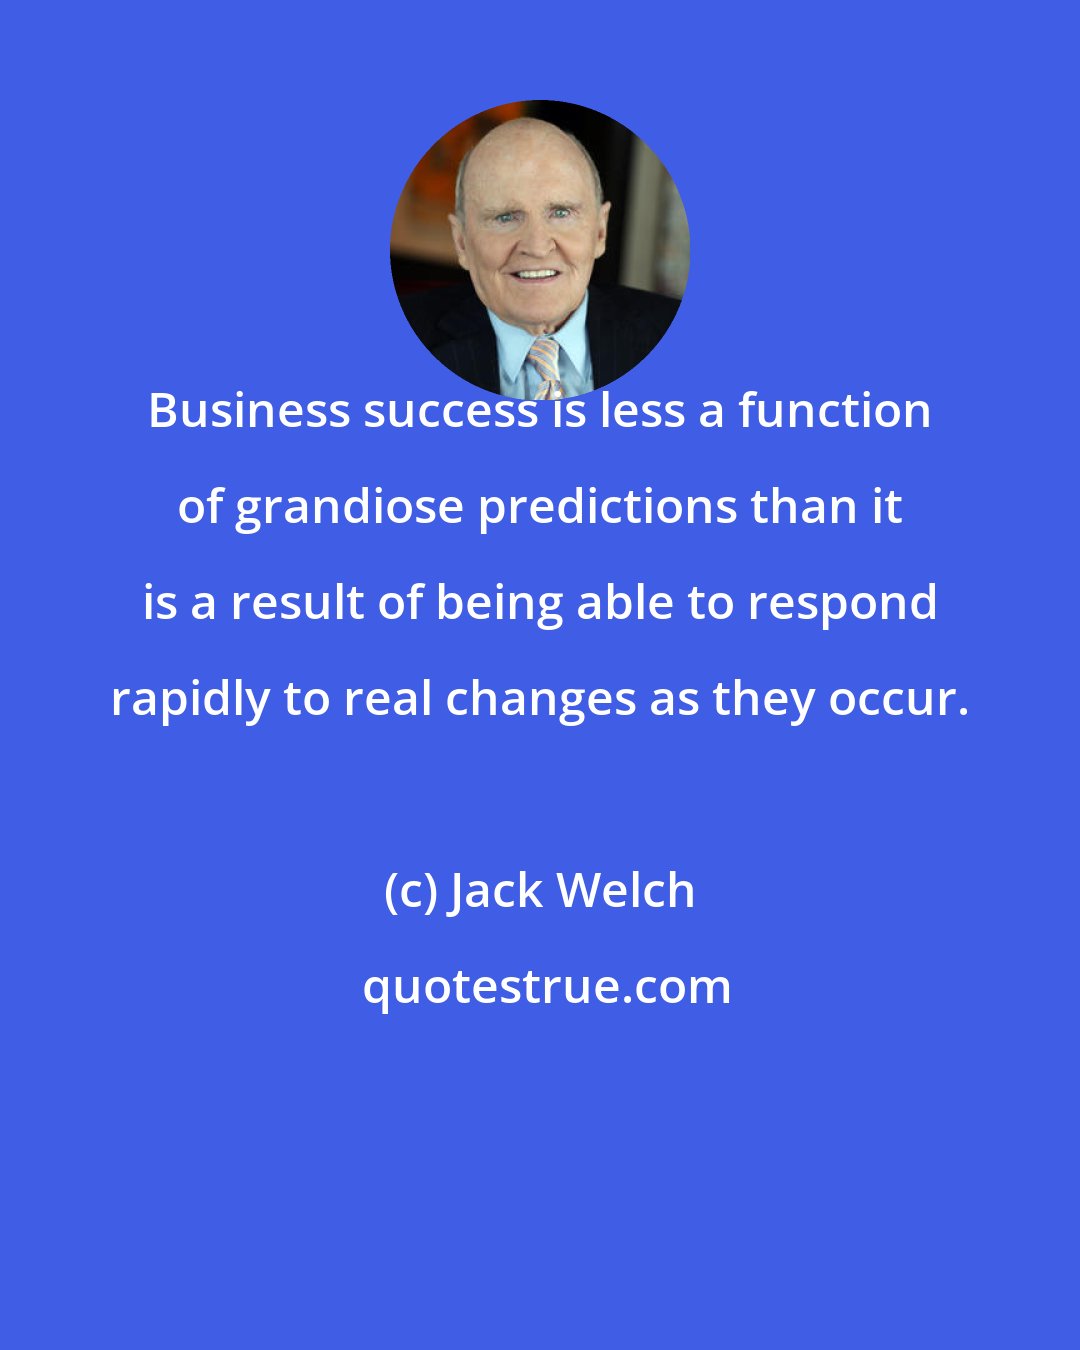 Jack Welch: Business success is less a function of grandiose predictions than it is a result of being able to respond rapidly to real changes as they occur.